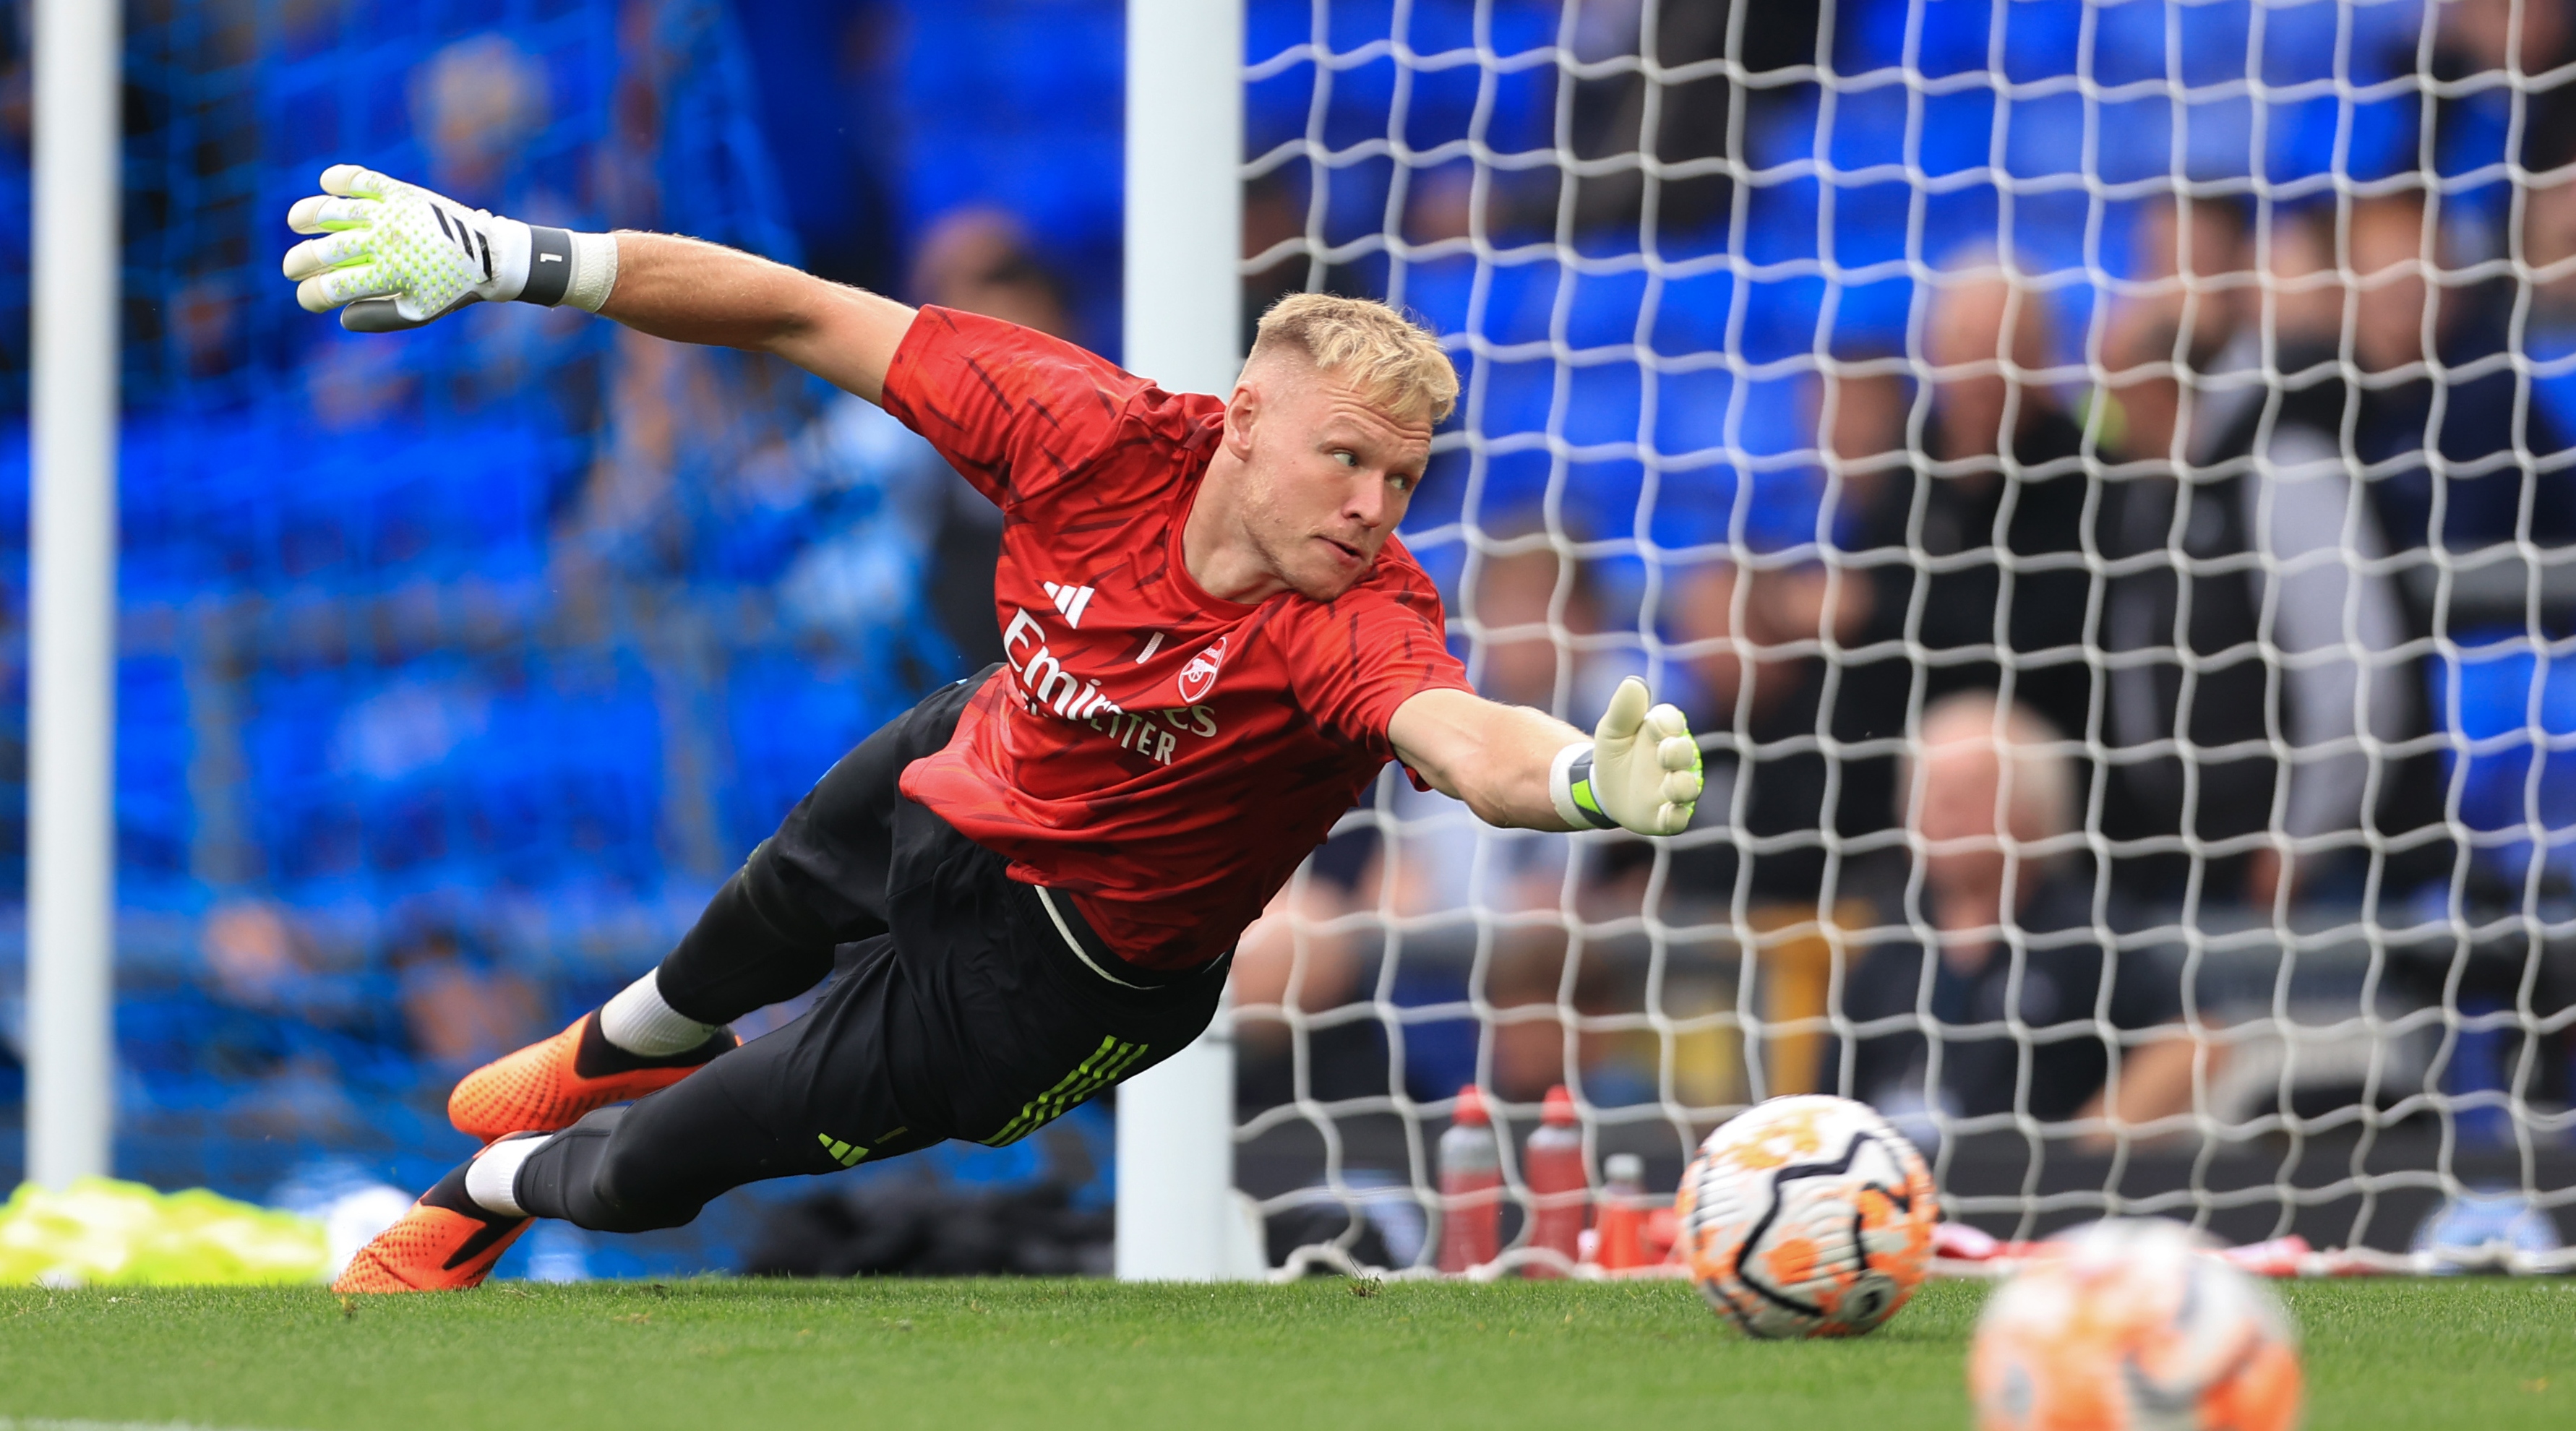 Arsenal goalkeeper Aaron Ramsdale appears to be kicked by